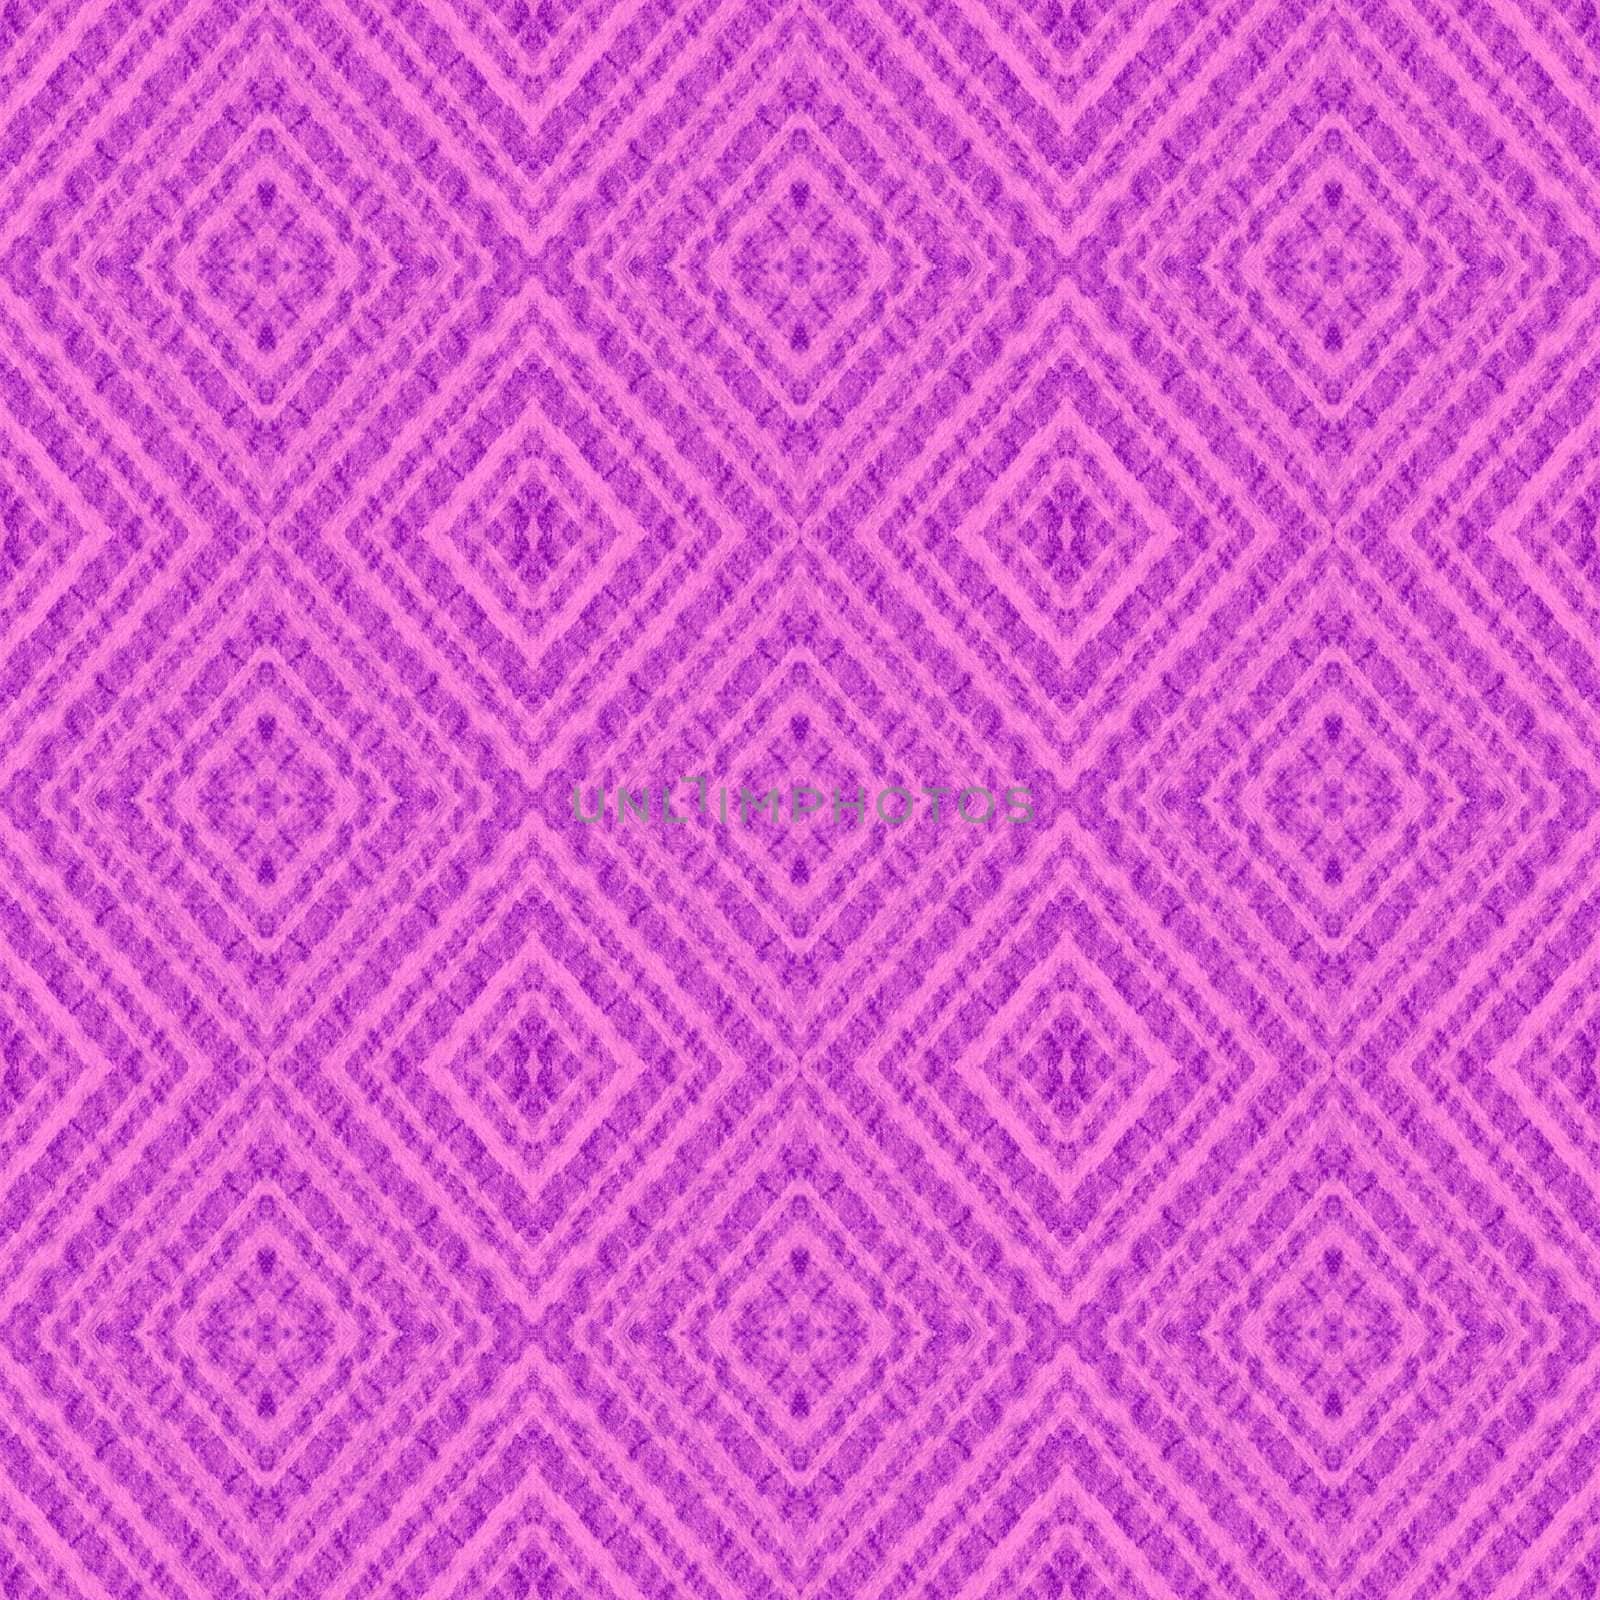 Seamless Tillable Woven Background Pattern of seersucker cotton fabric. Retro style background with a fine structure.